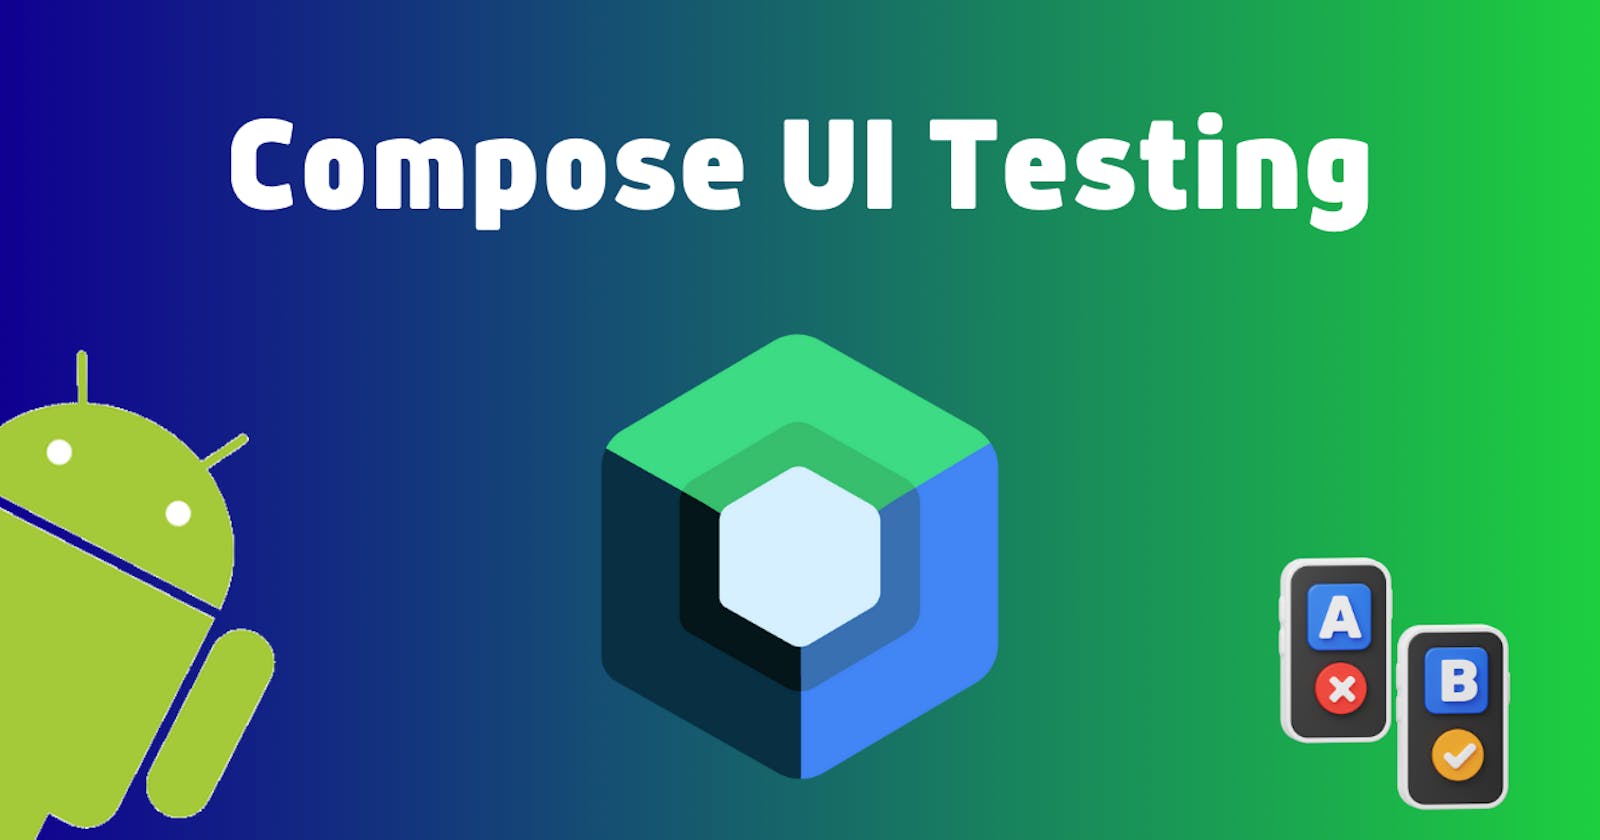 Jetpack Compose UI Testing in Android